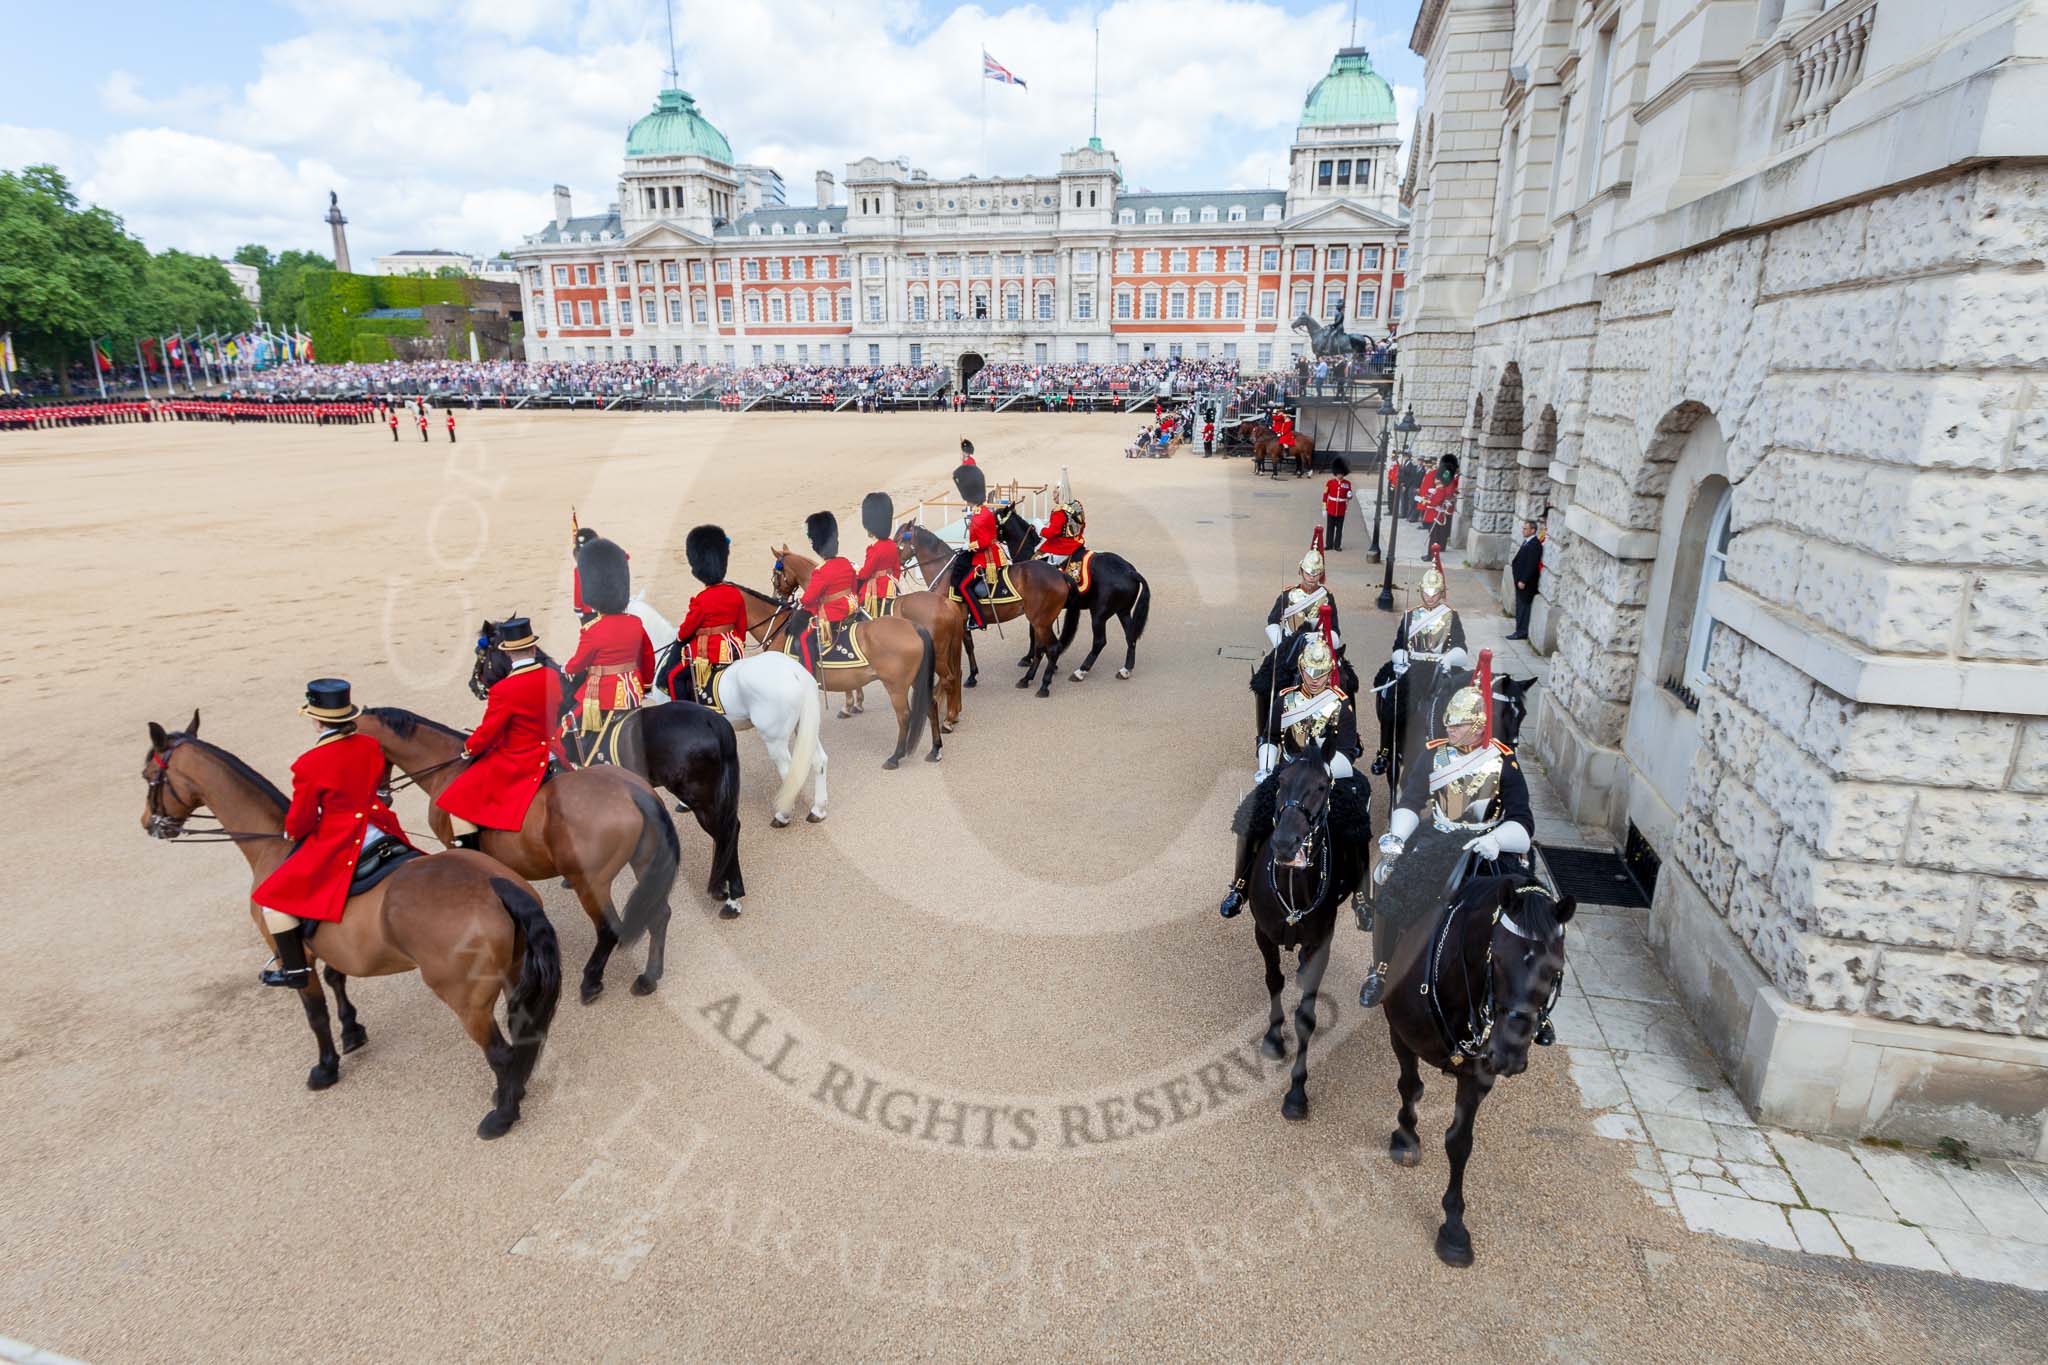 The Colonel's Review 2015.
Horse Guards Parade, Westminster,
London,

United Kingdom,
on 06 June 2015 at 11:01, image #212